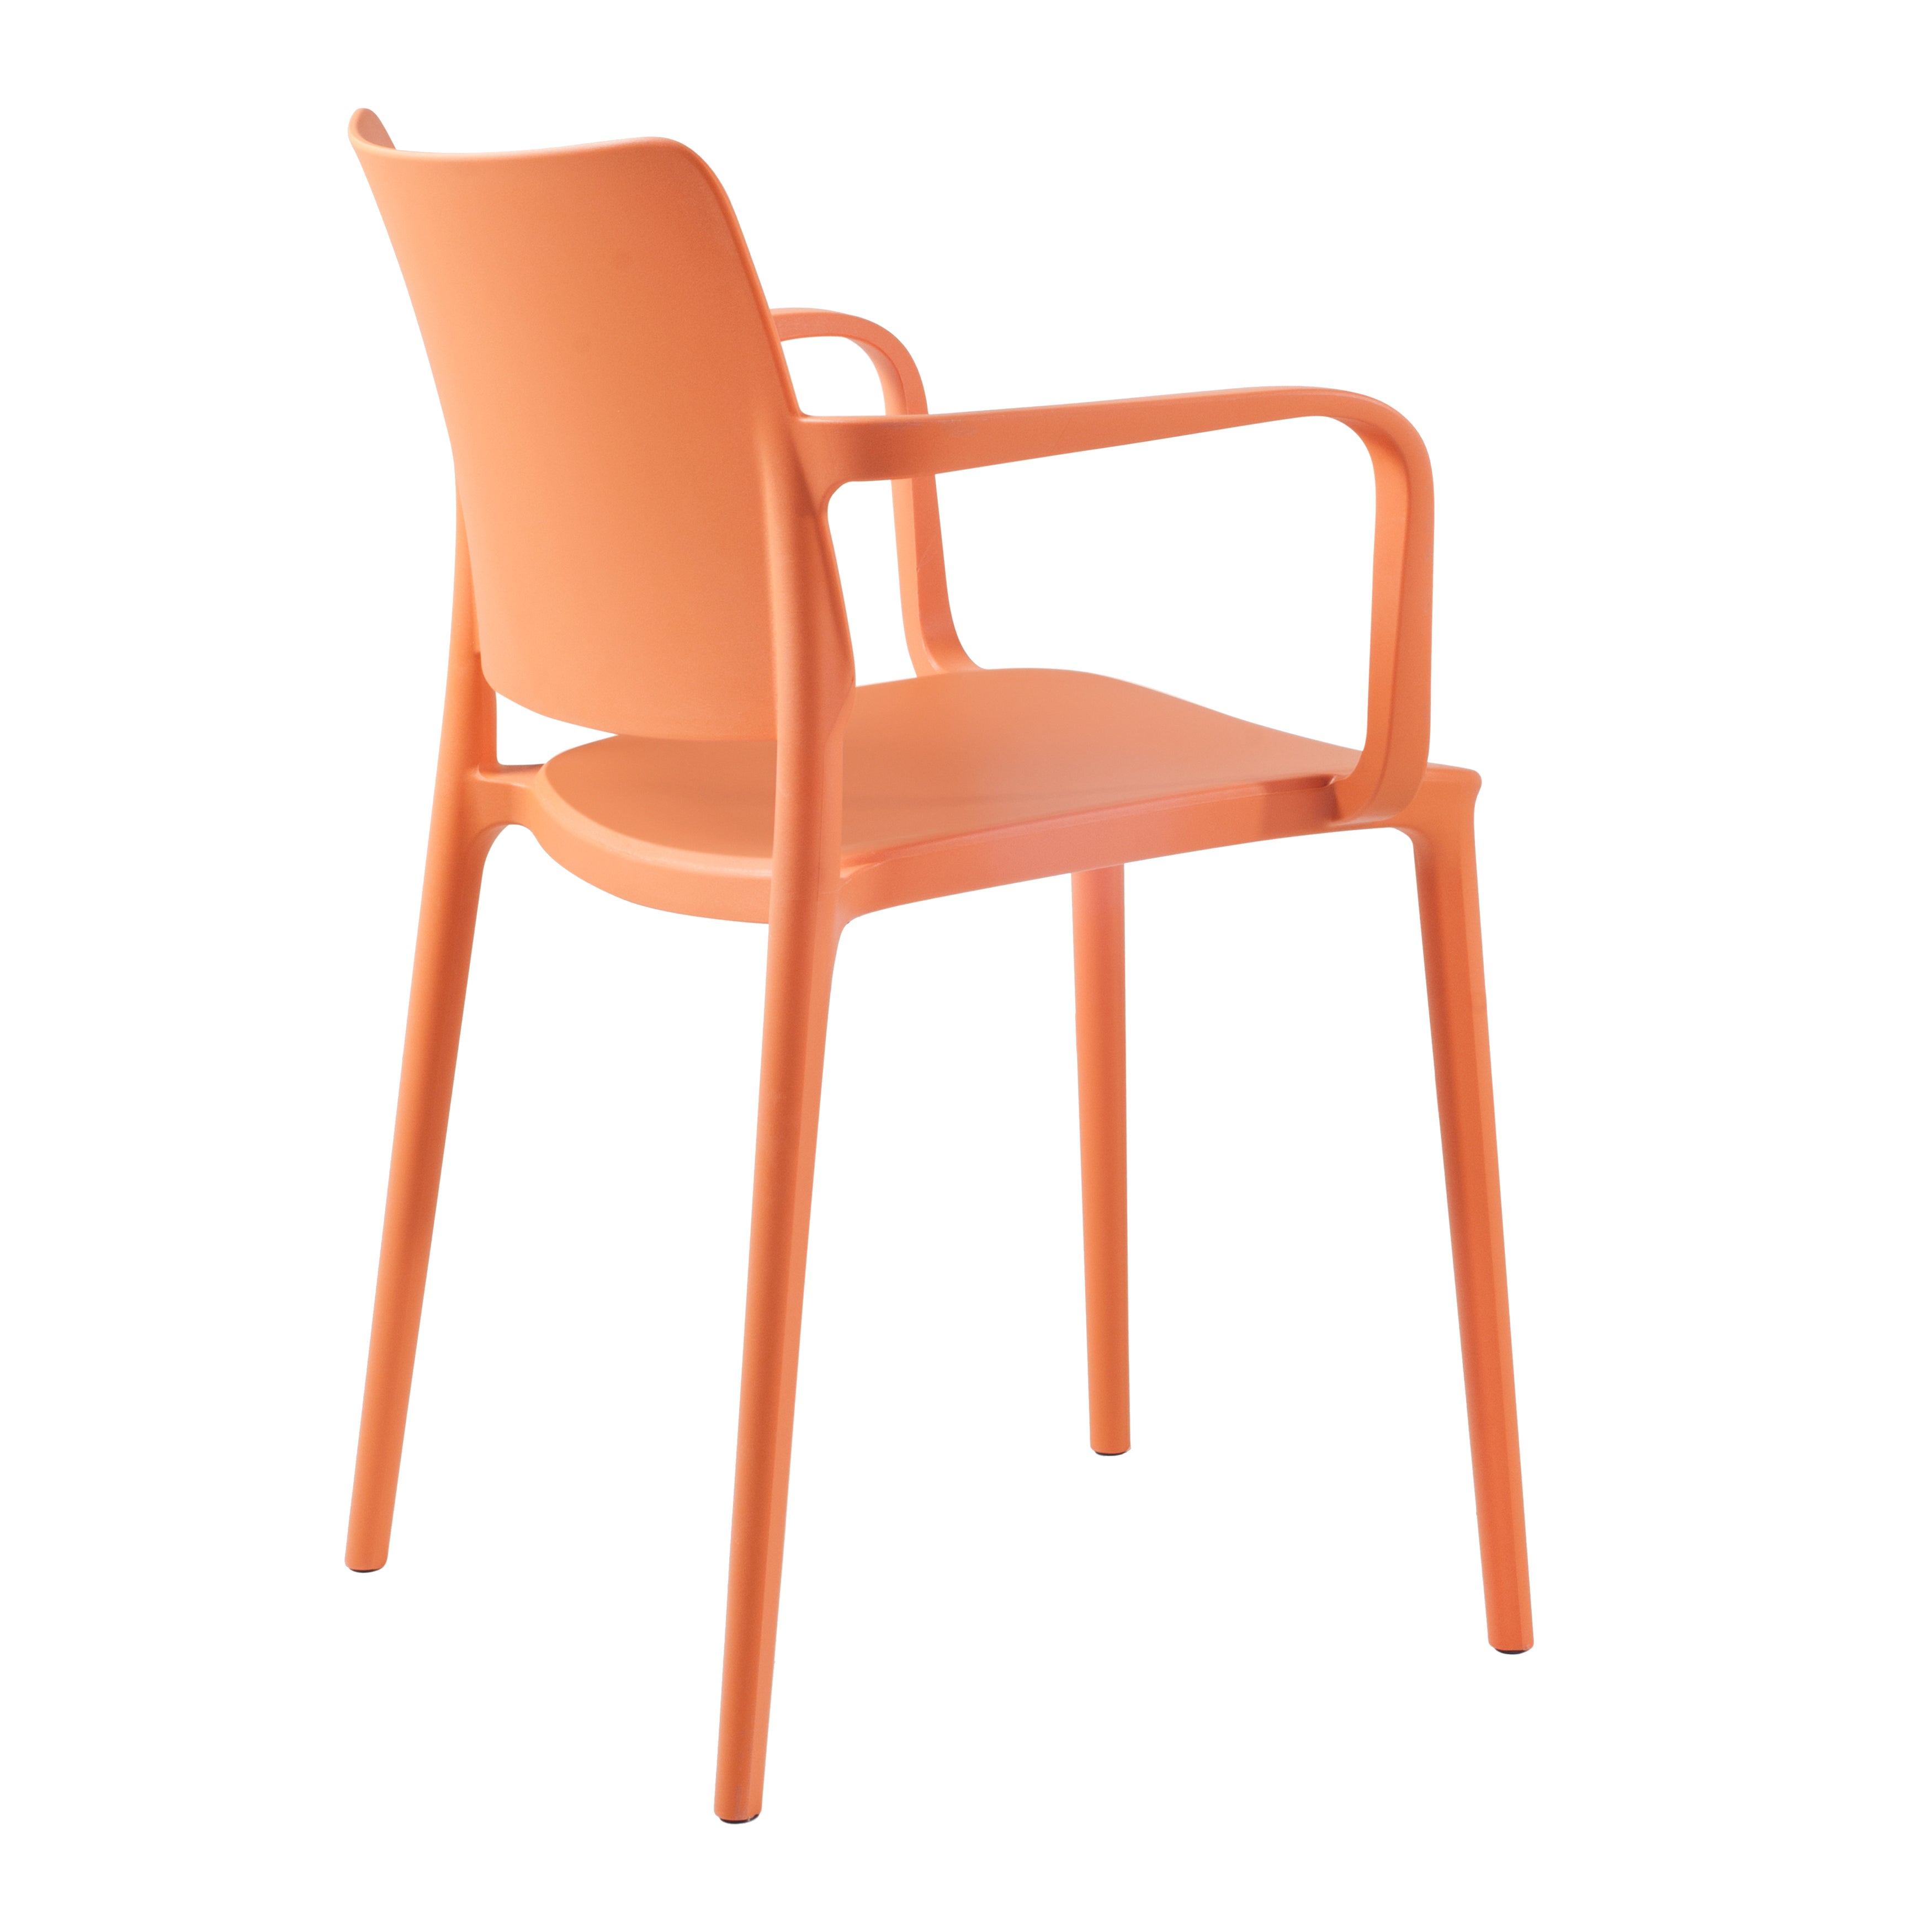 Cleo Arm Patio Dining Chair in Orange - (Set of 2)